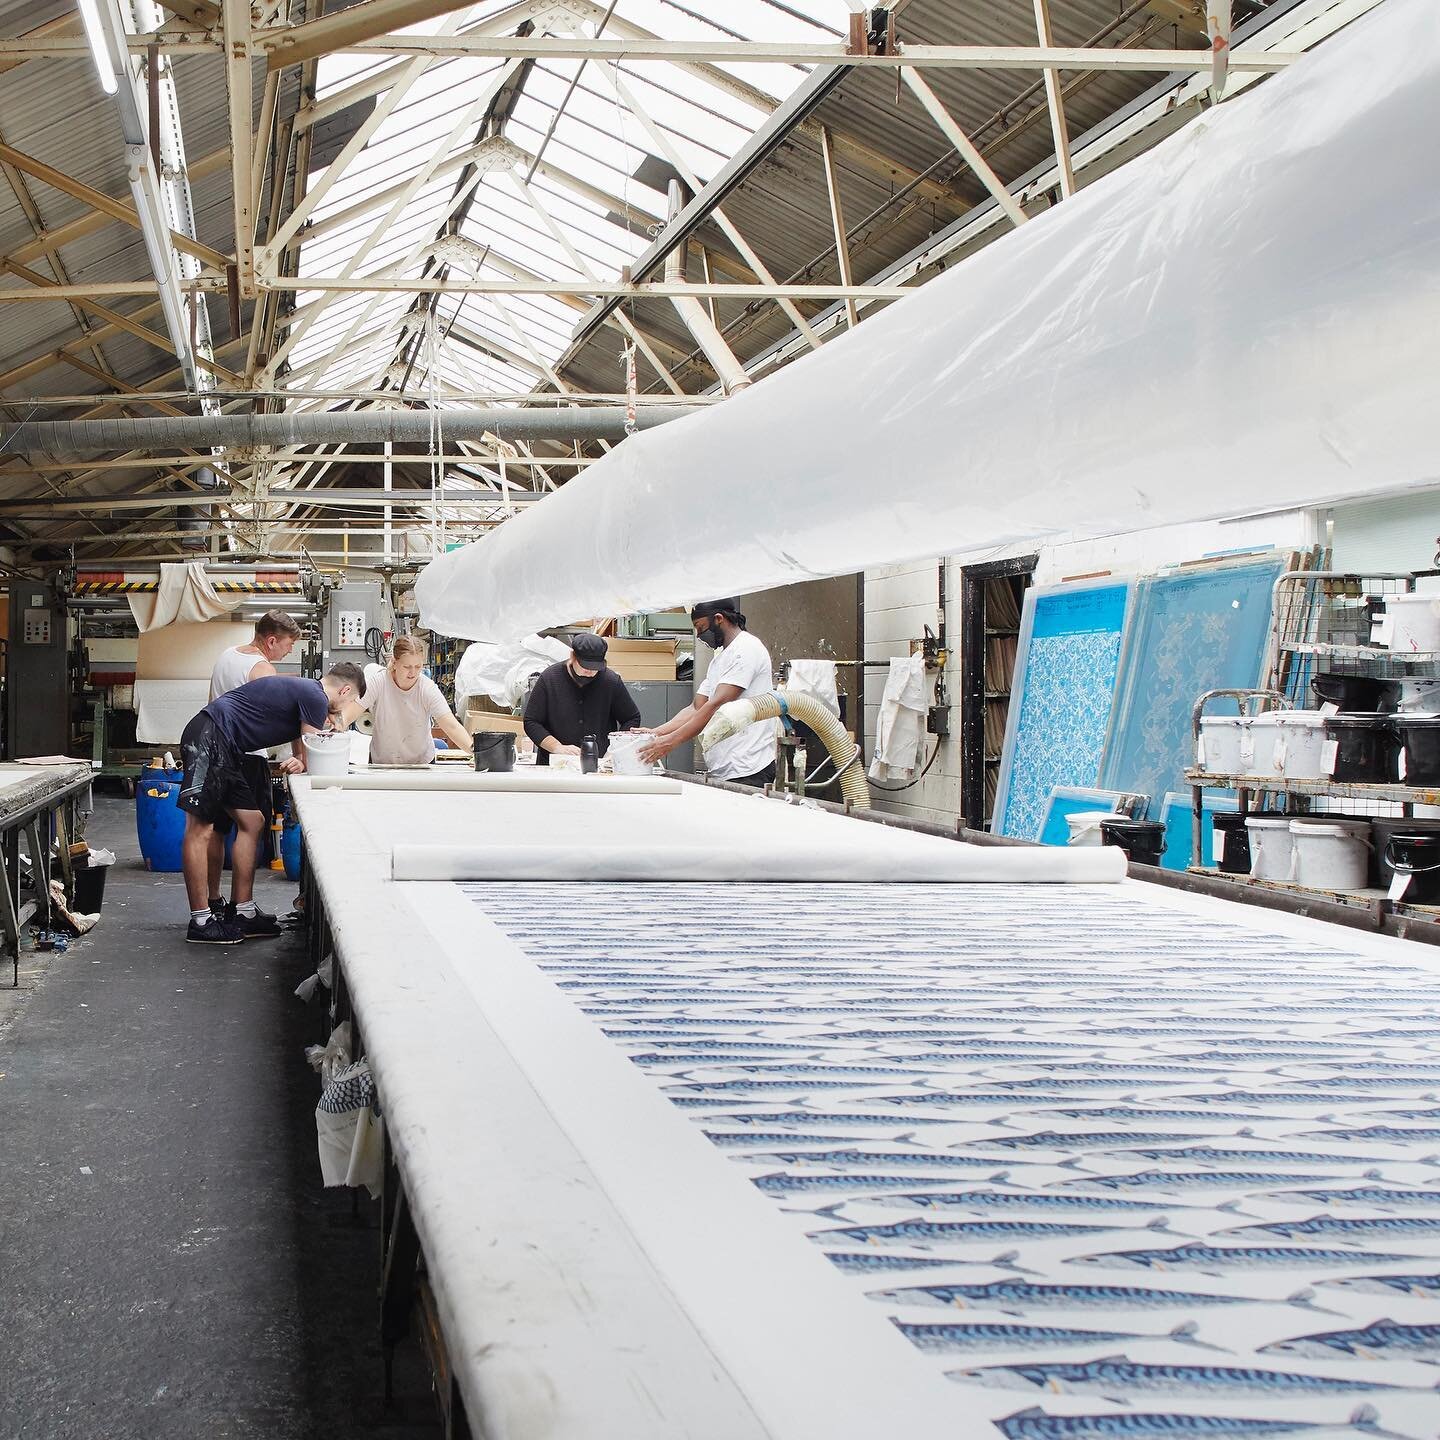 Inside Ivo Prints&rsquo; 37,000 sq ft factory in Southall that includes three 53 metre-long manual screen-printing tables. The 45-strong team produce wallpaper and printed textiles, as they have since 1963. The image is by @carmelkingphoto from the b